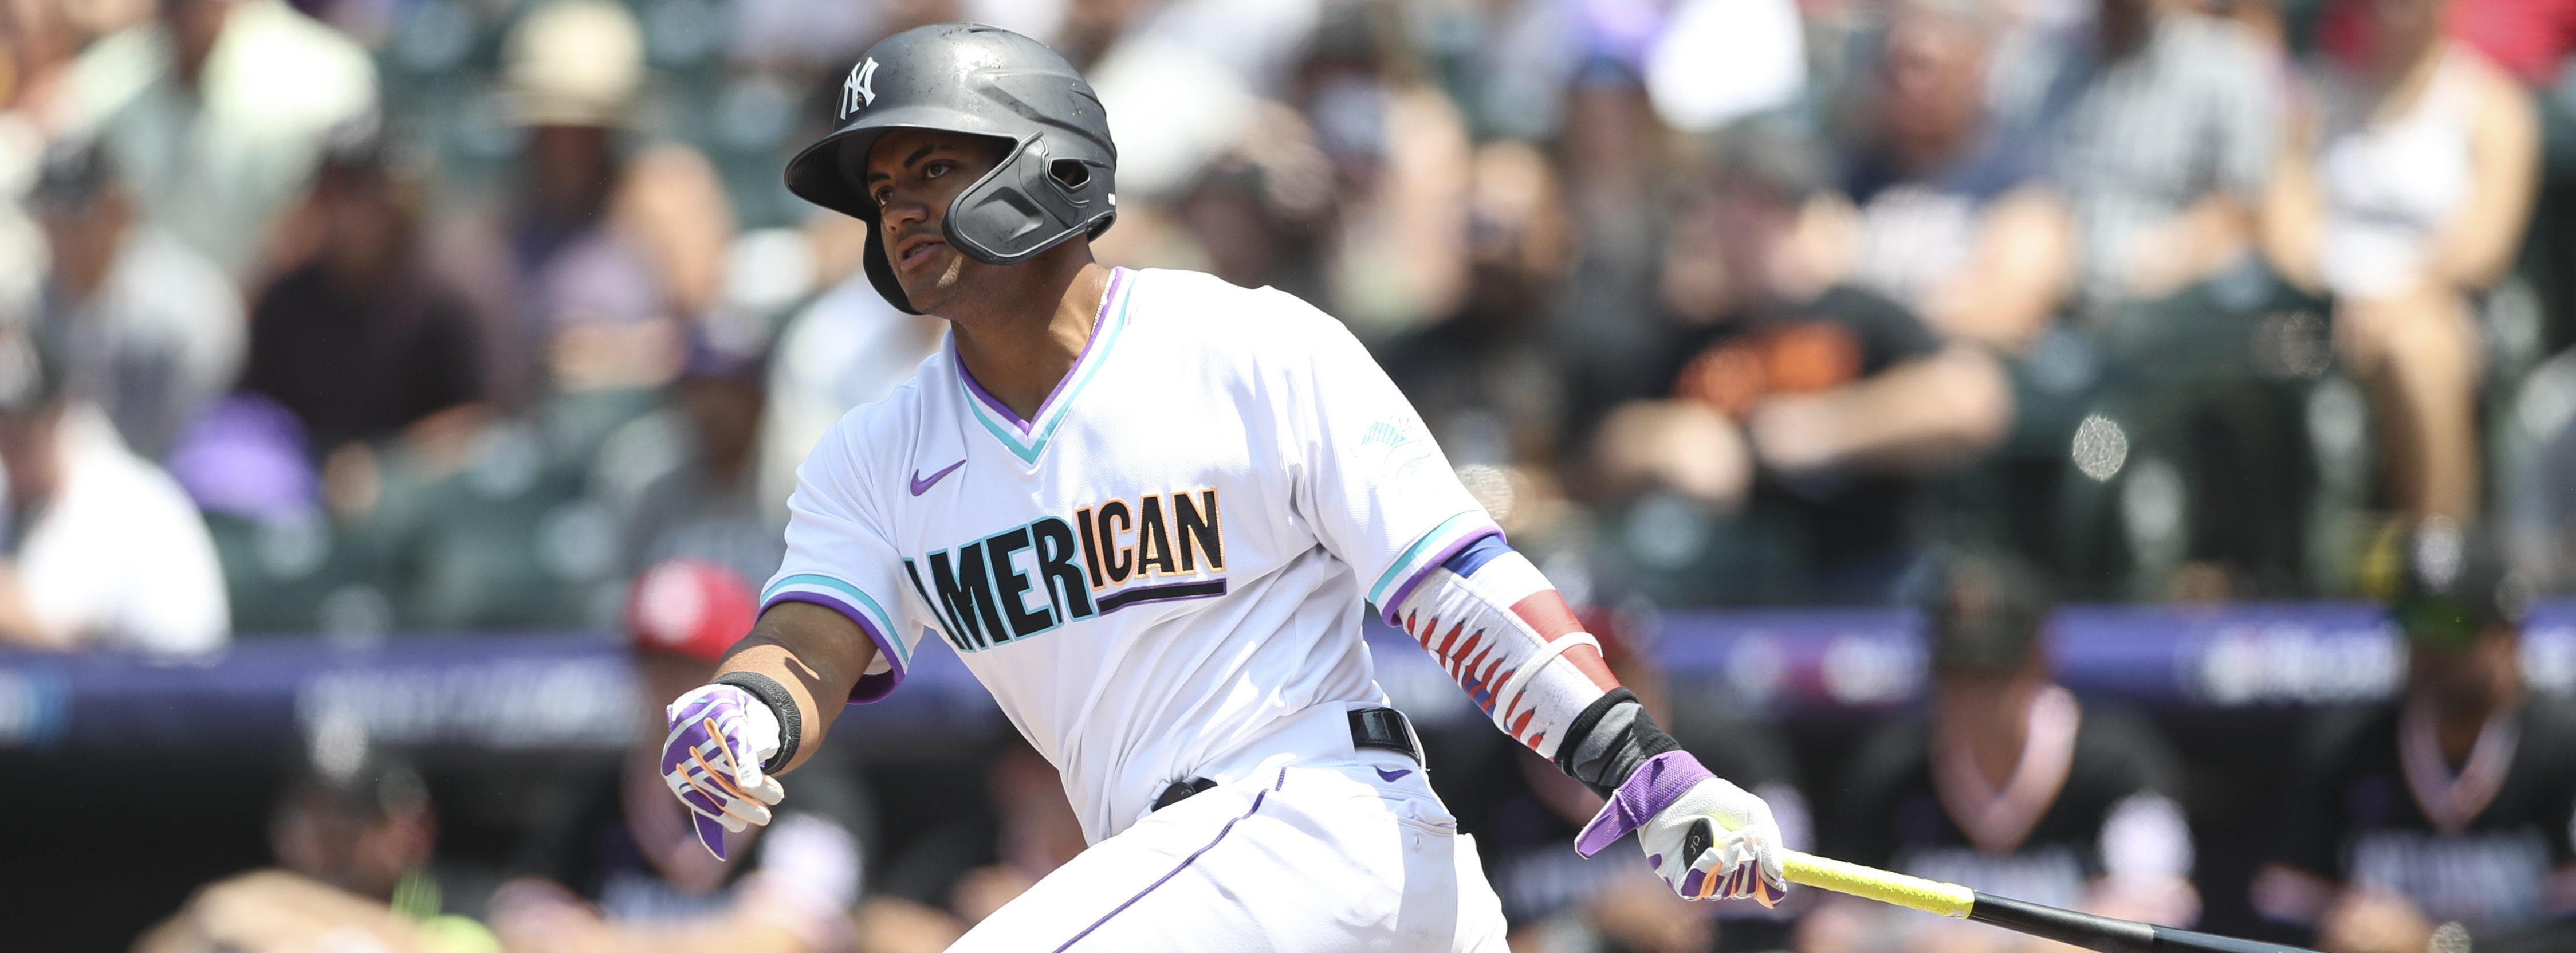 2023 Yankees Farm System Roster Projections - Pinstriped Prospects